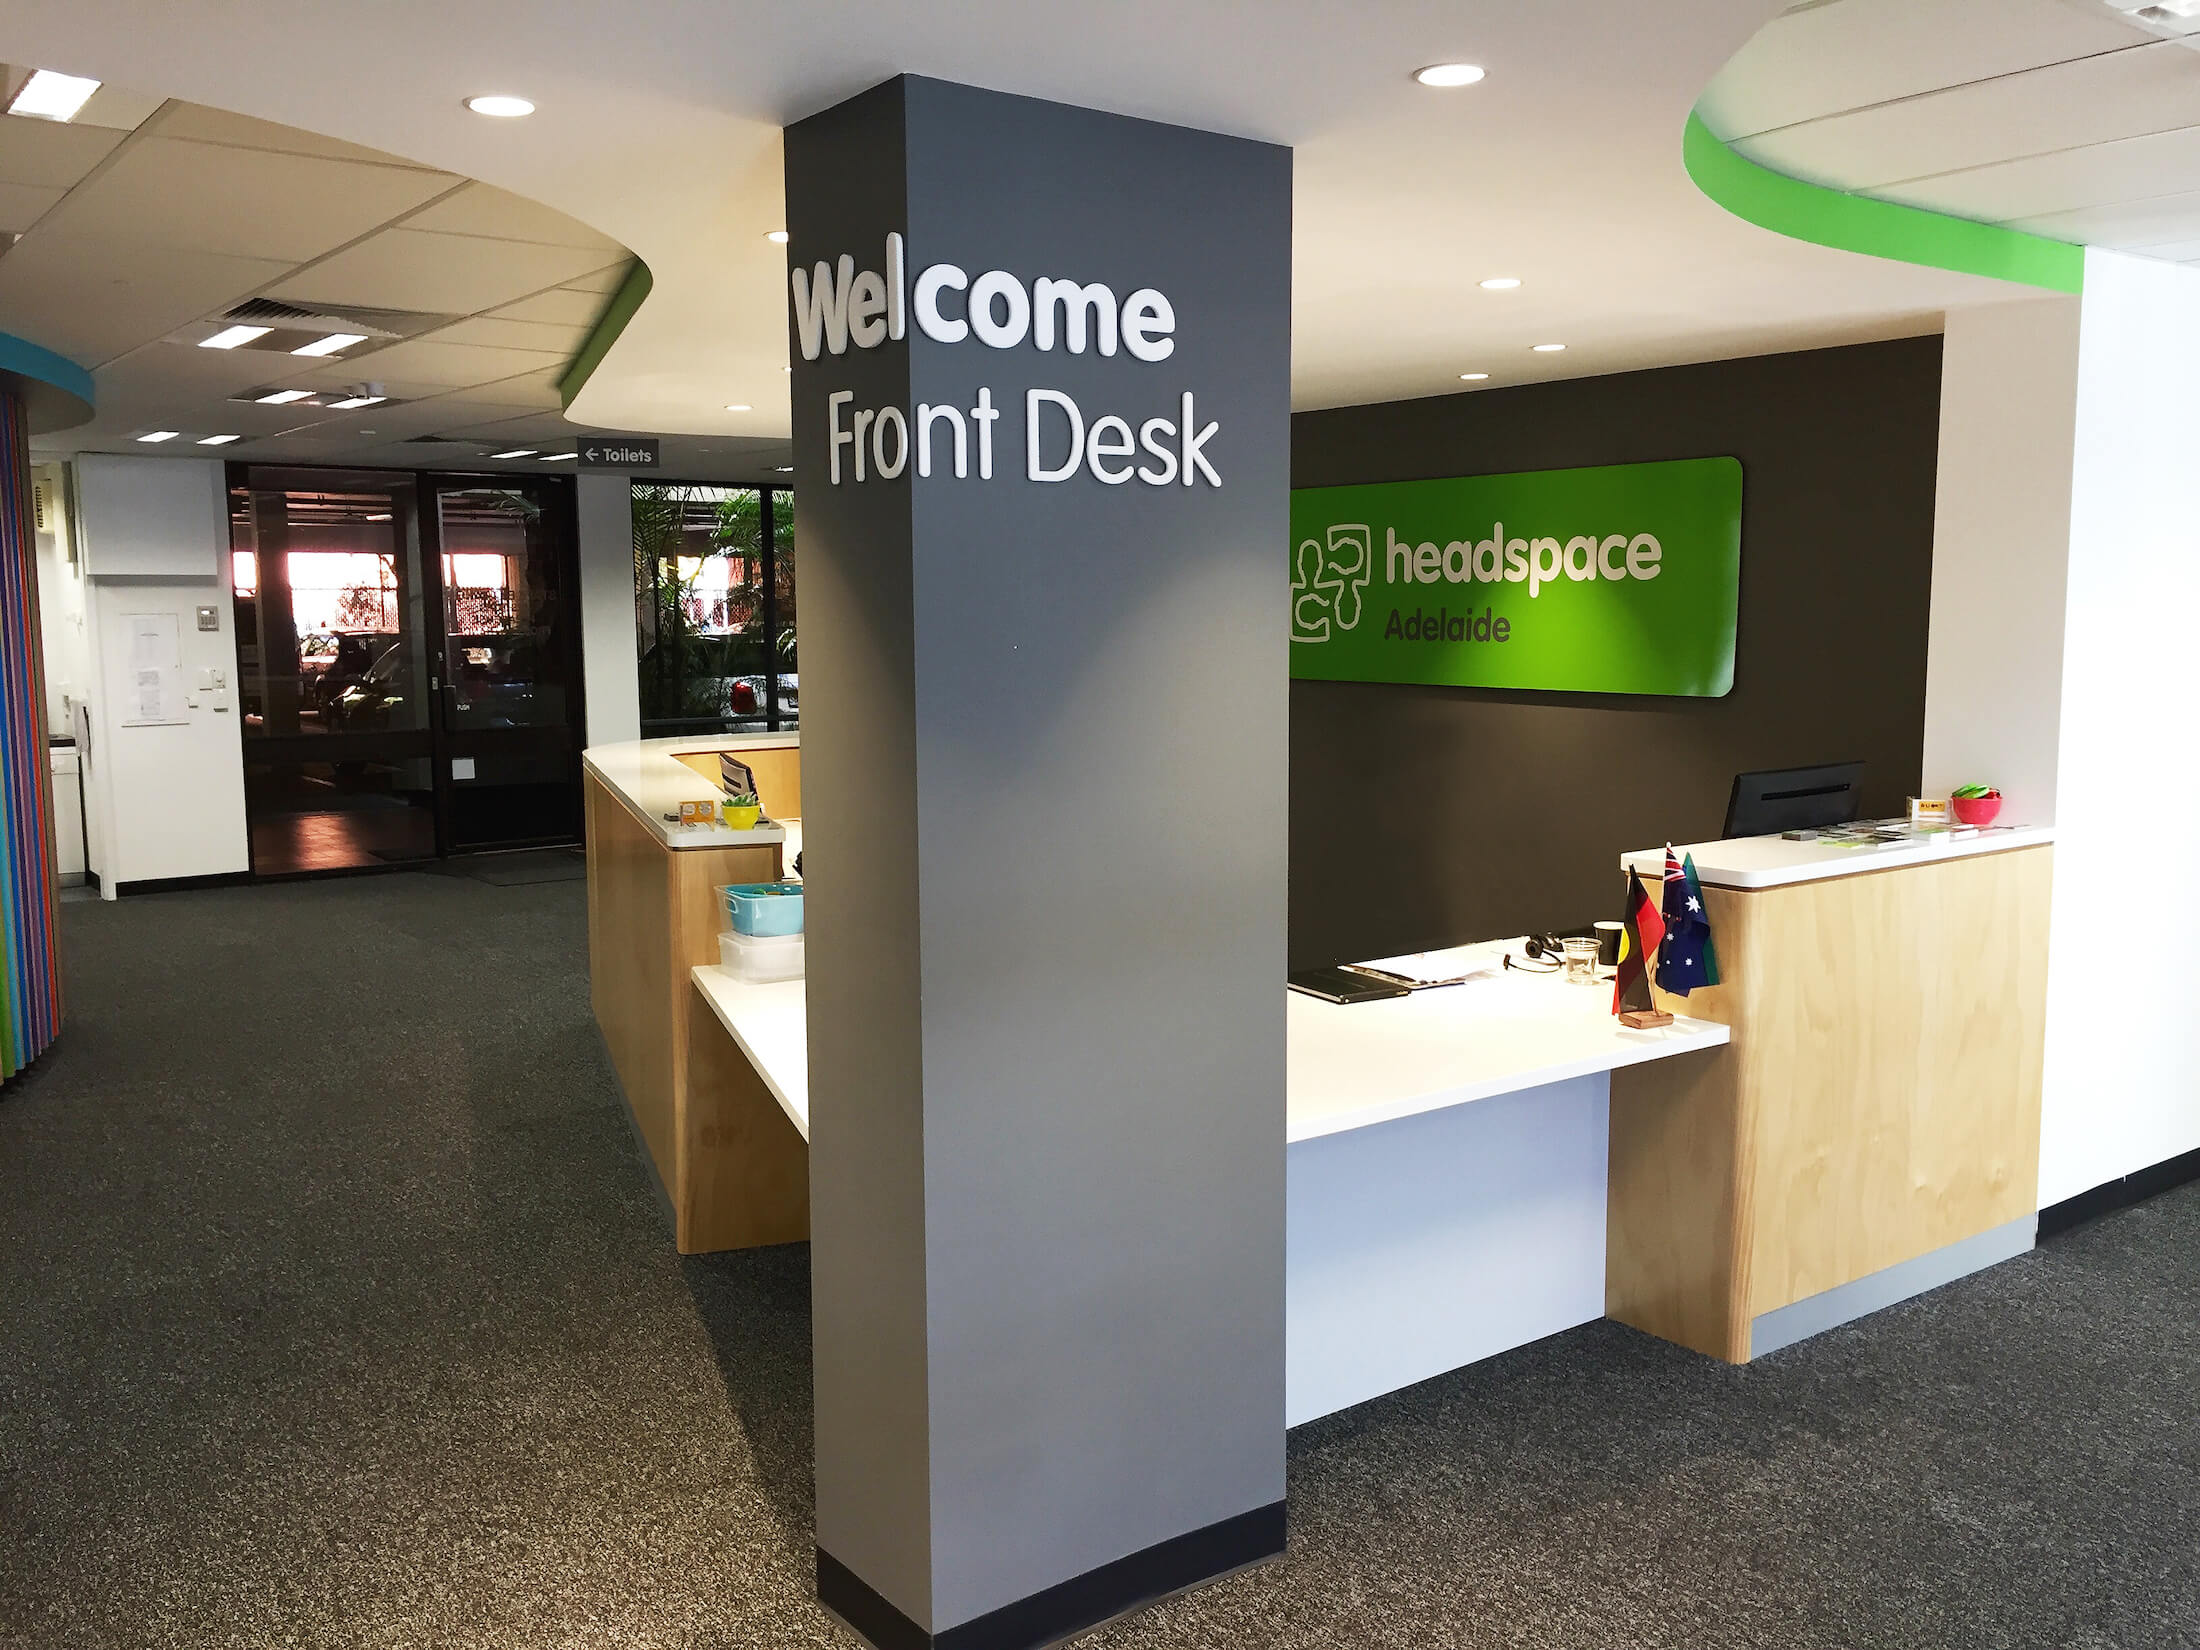 Sign stating "Welcome Front Desk" on grey pillar. Green "headspace Adelaide" sign behind reception